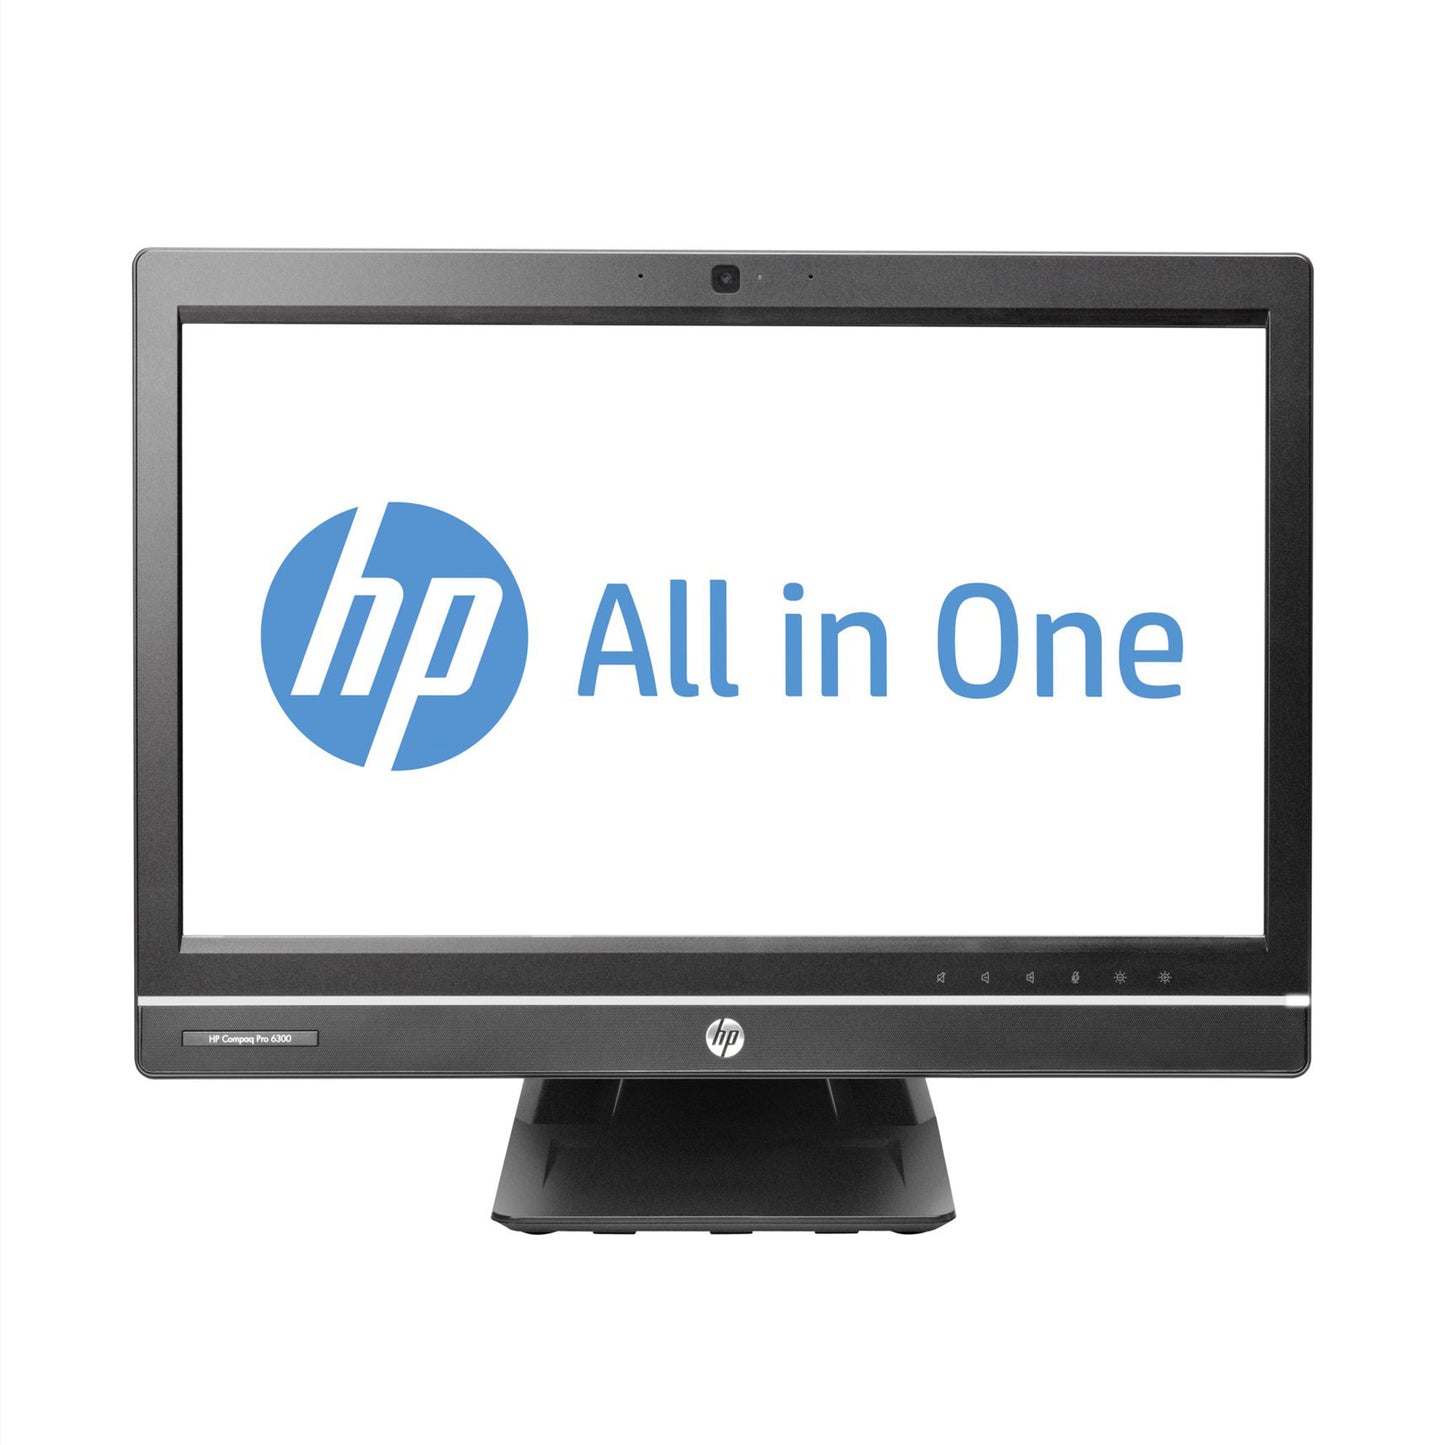 HP Pro 6300 Core i5 Non-Touch All-In-One Desktop Computer Offers (Used Very Clean)